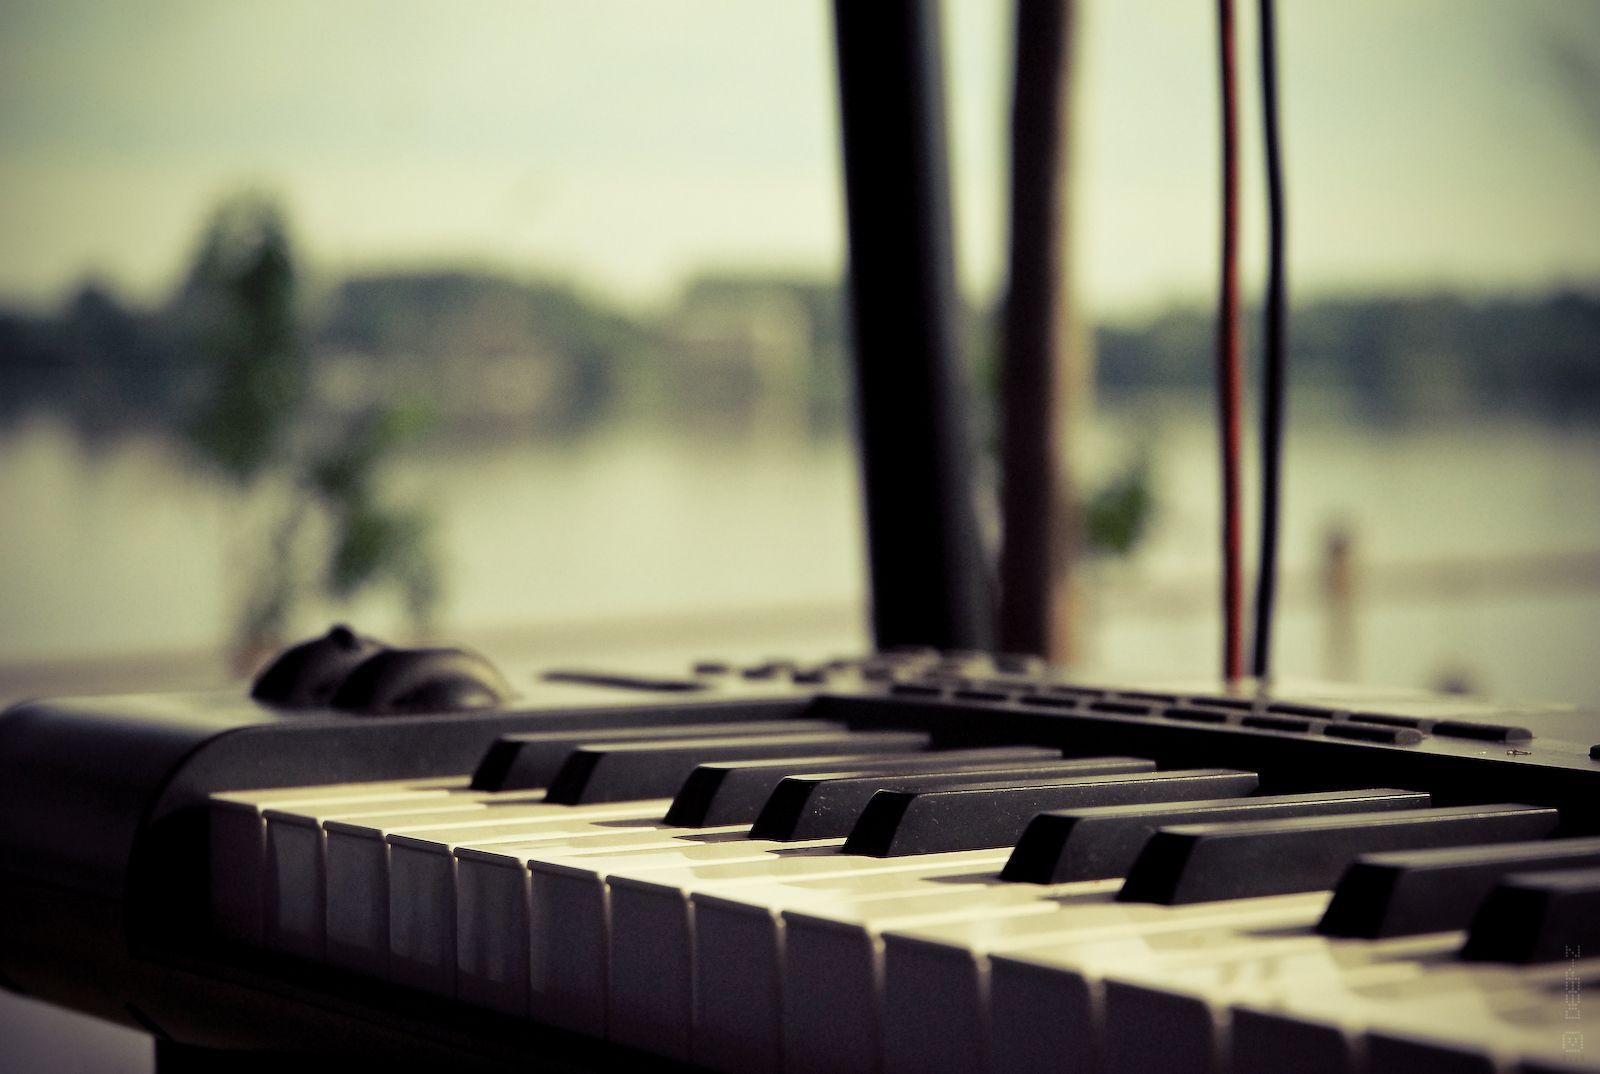 Wallpaper For > Piano Wallpaper HD Vintage. music is life^0